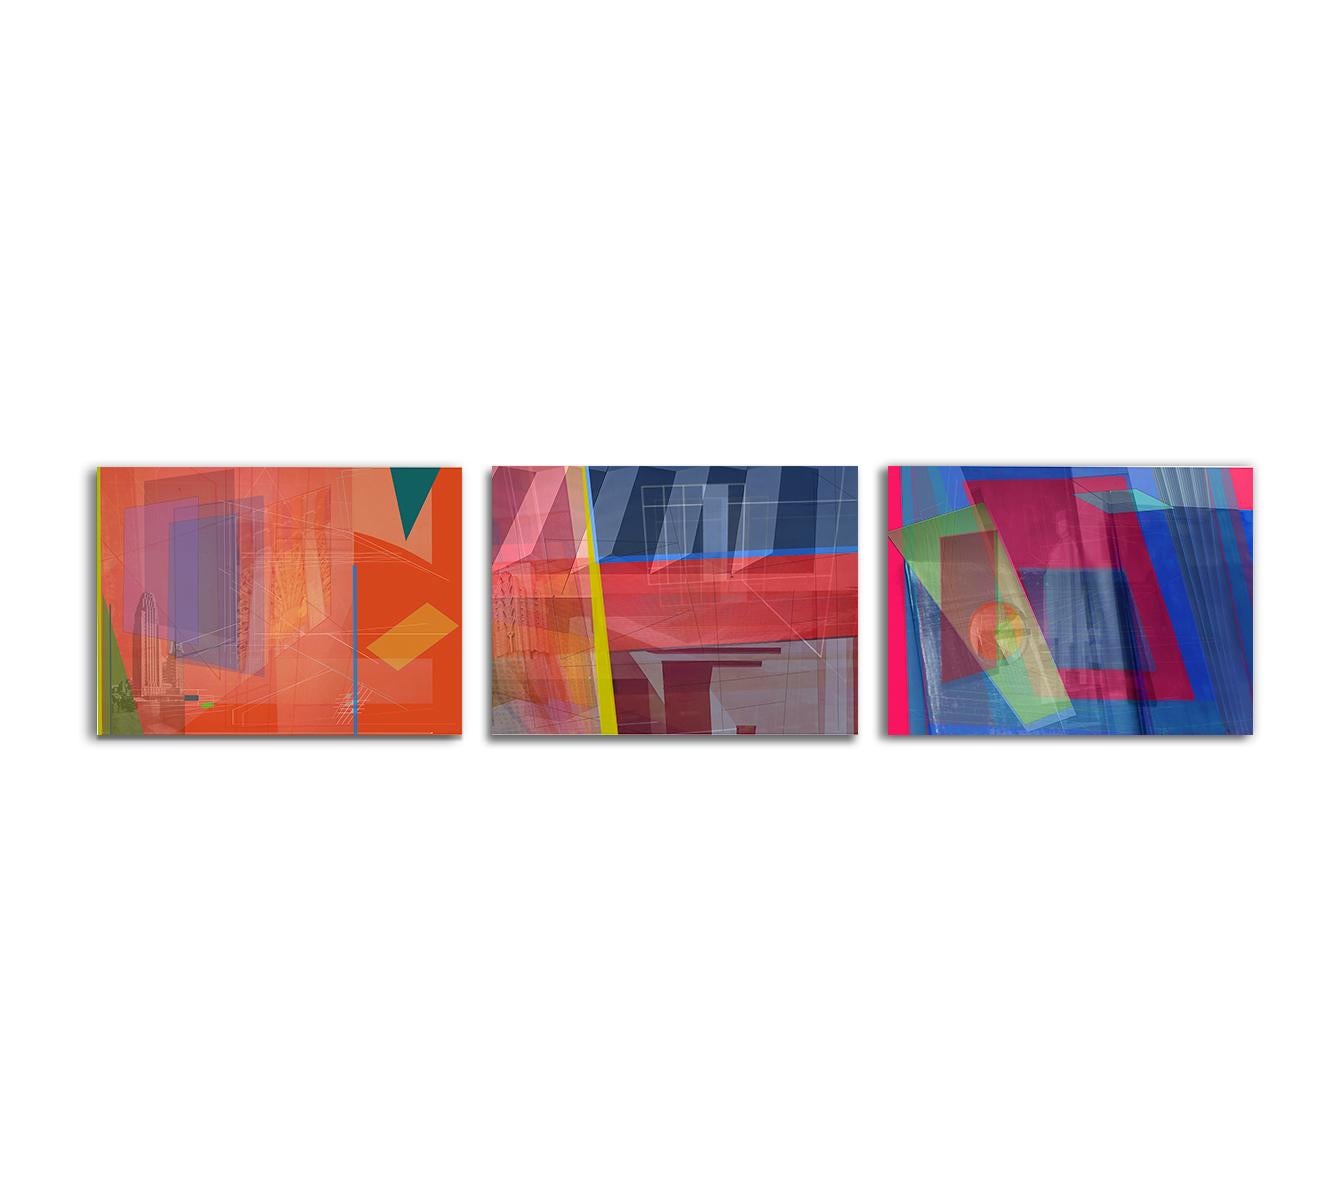 Monika Bravo Abstract Photograph - Parallel Fields #1, #2 and #3.  Abstract limited edition color photograph